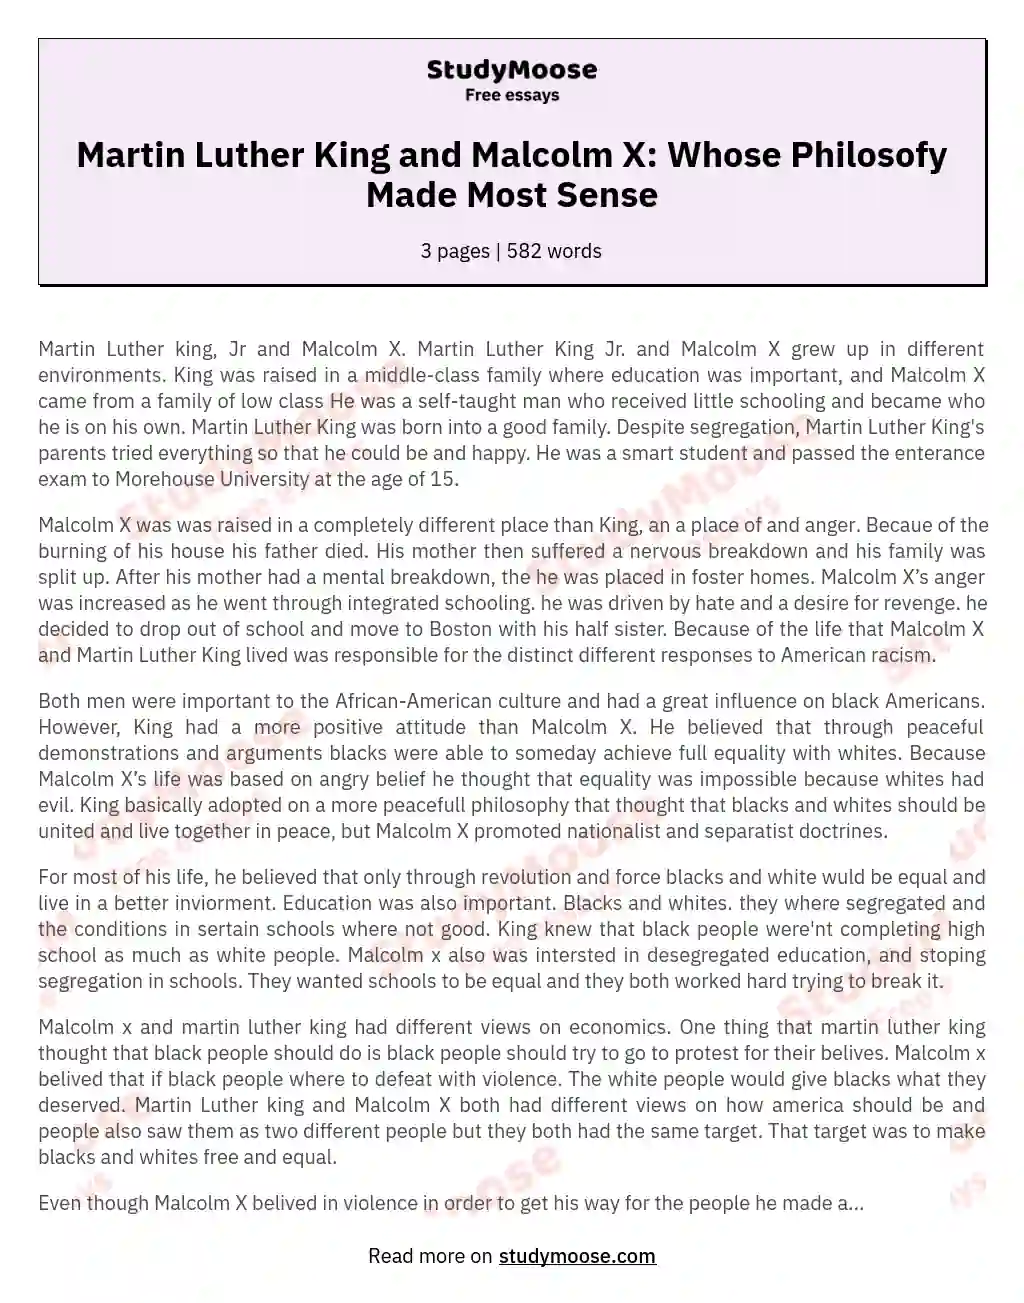 Martin Luther King and Malcolm X: Whose Philosofy Made Most Sense